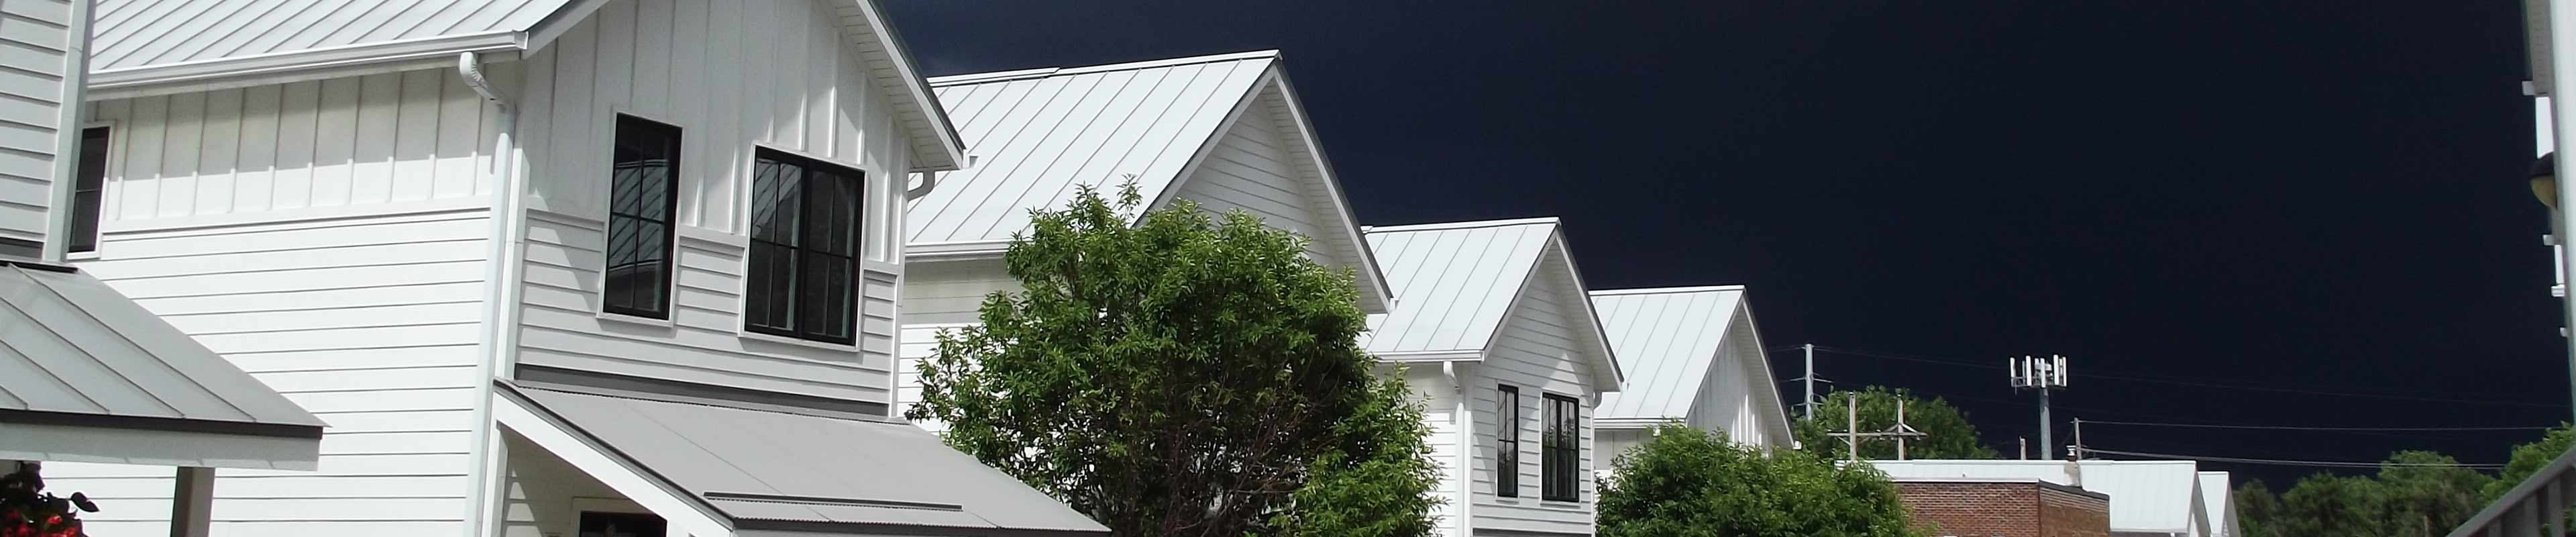 A row of houses in a neighborhood with storm clouds that will bring strong rain and roof leaks behind it.